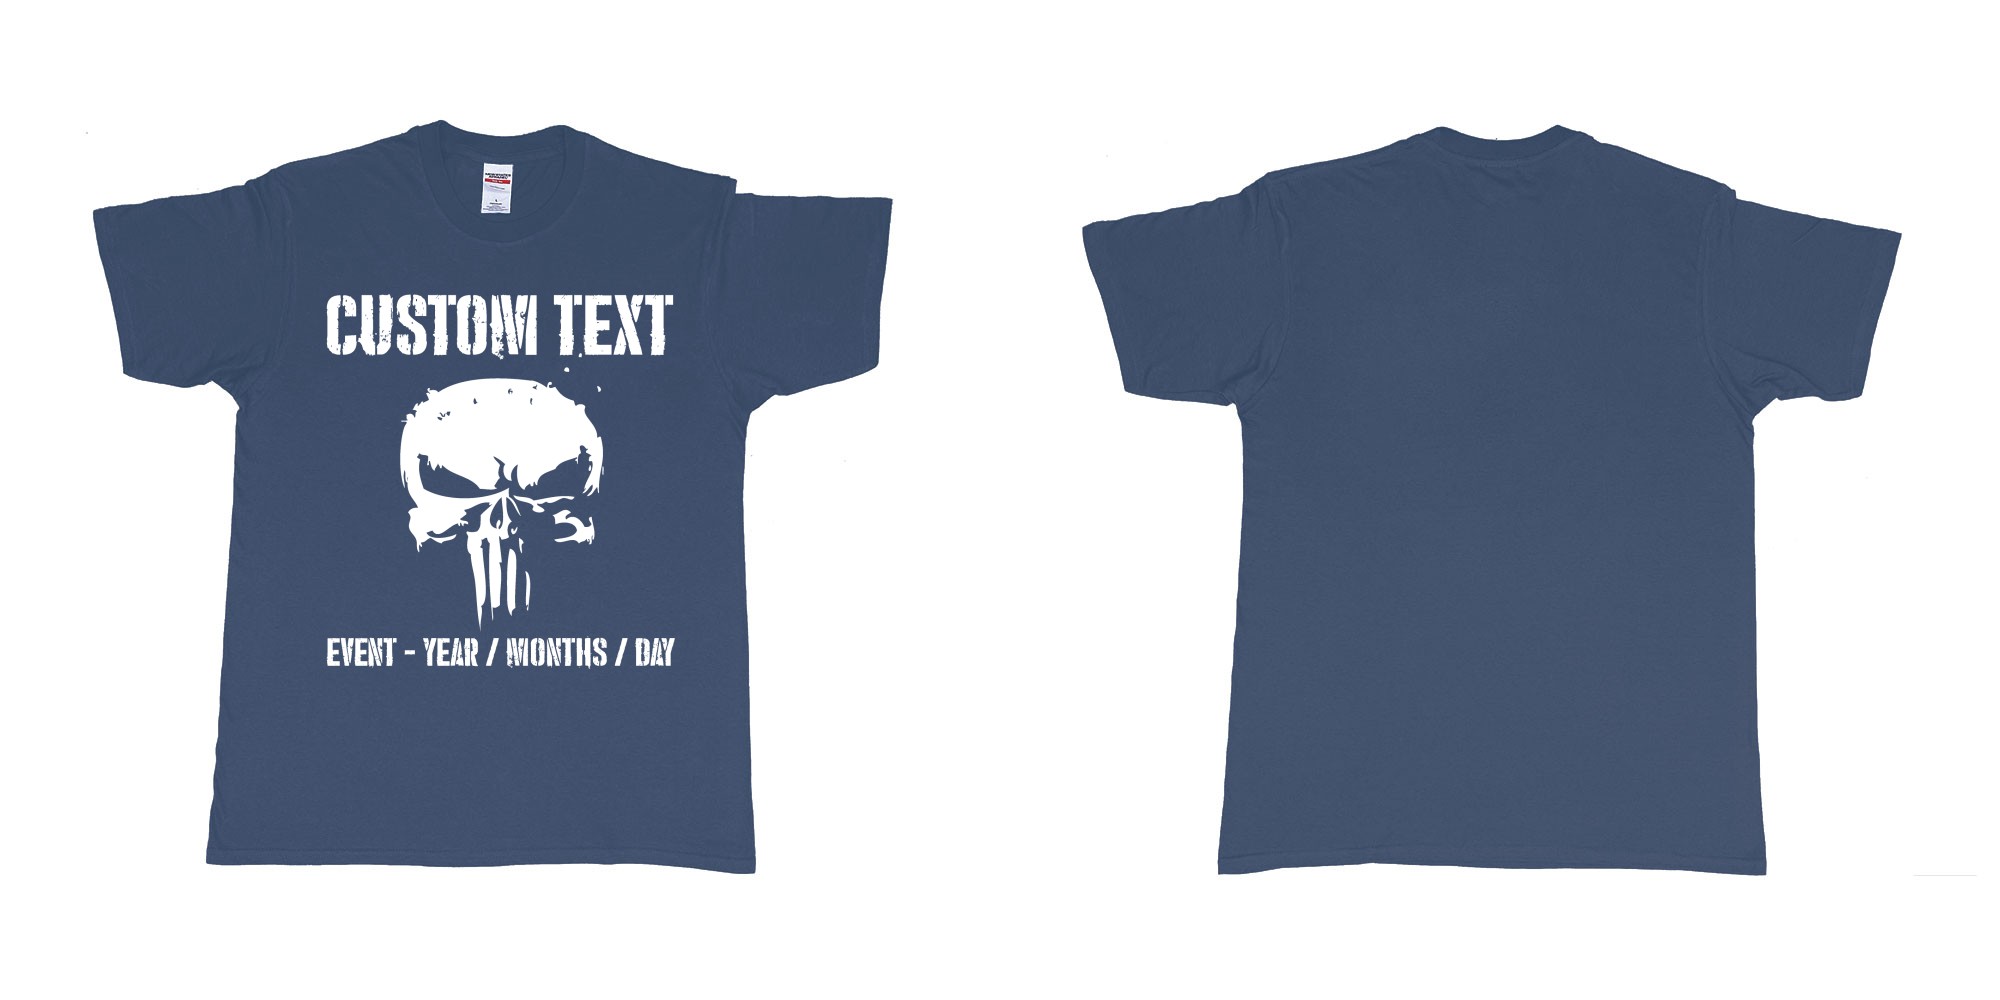 Custom tshirt design the punisher scull logo custom text in fabric color navy choice your own text made in Bali by The Pirate Way